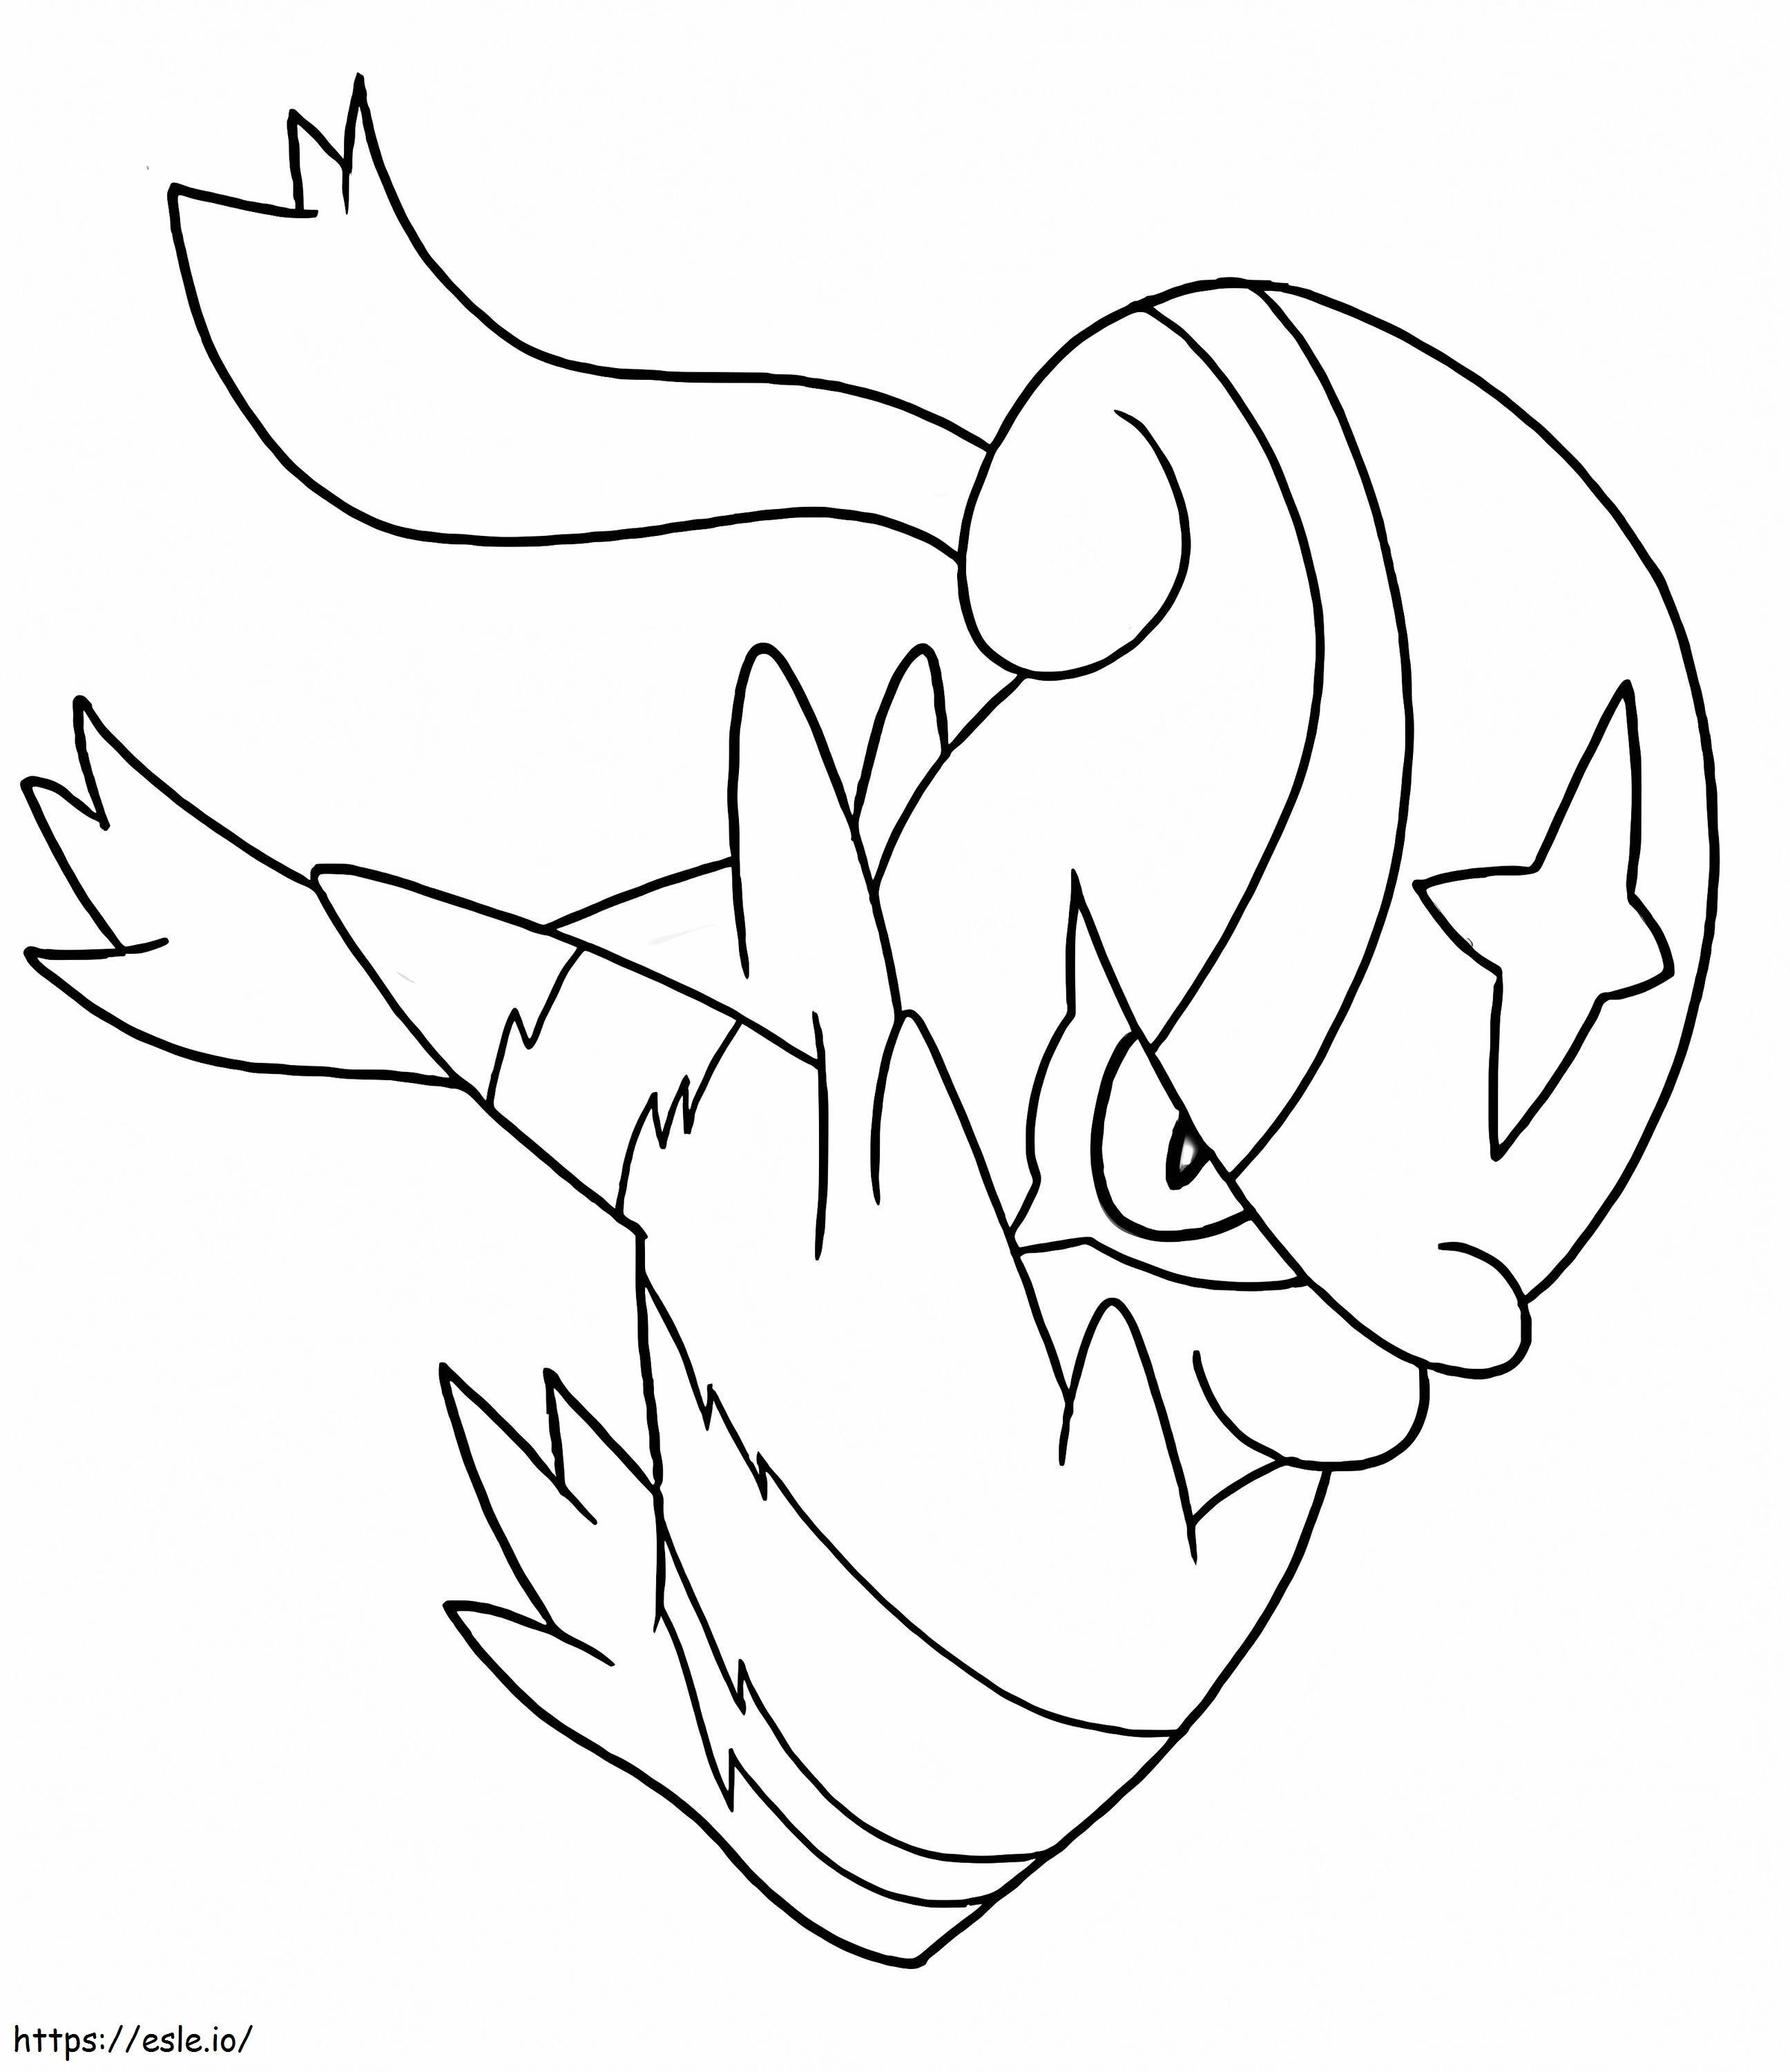 Printable Accelgor Pokemon coloring page